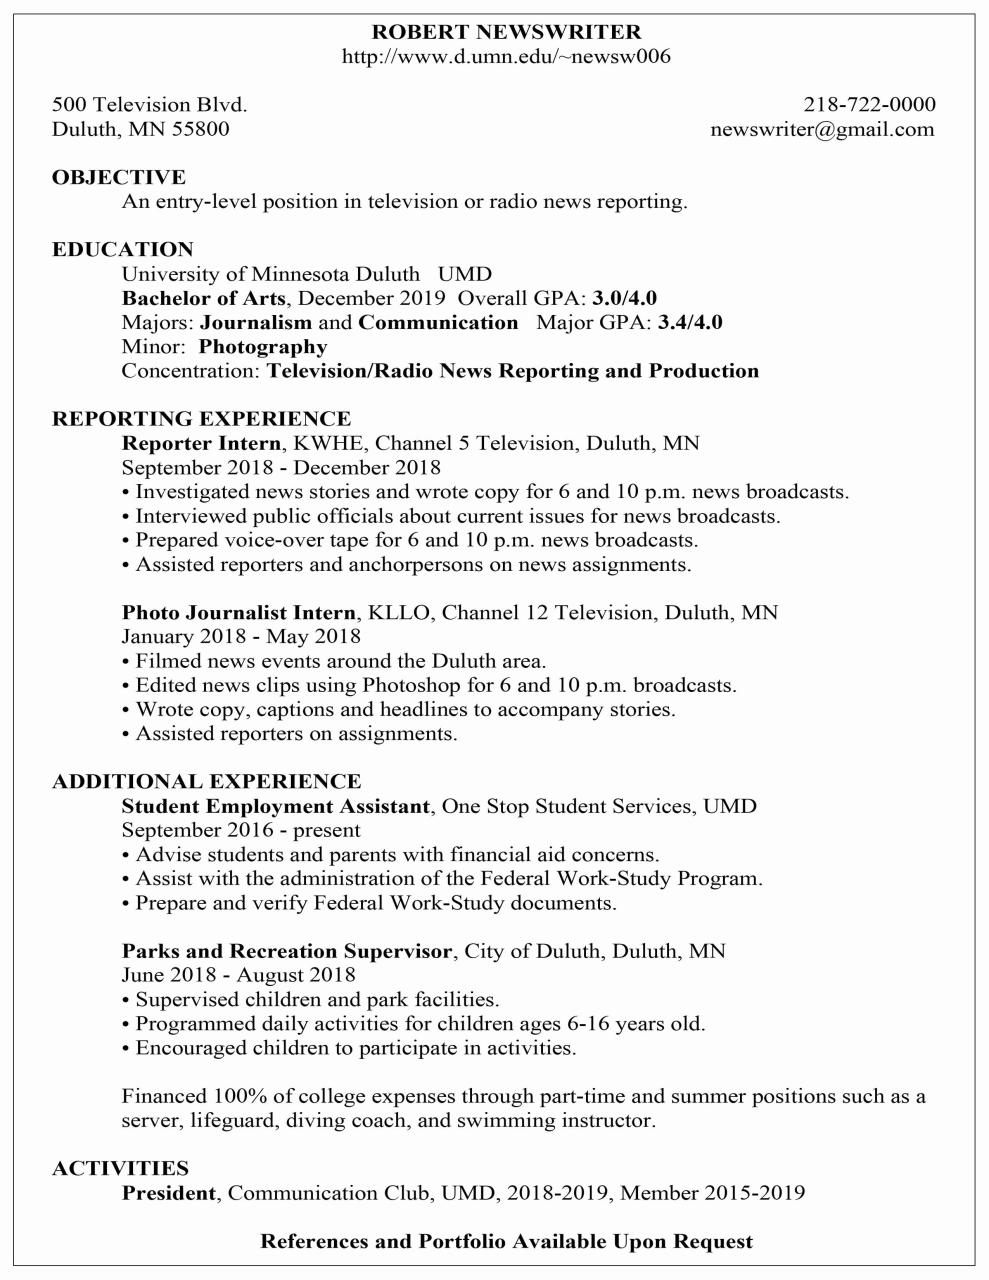 Federal Resume Example 2019